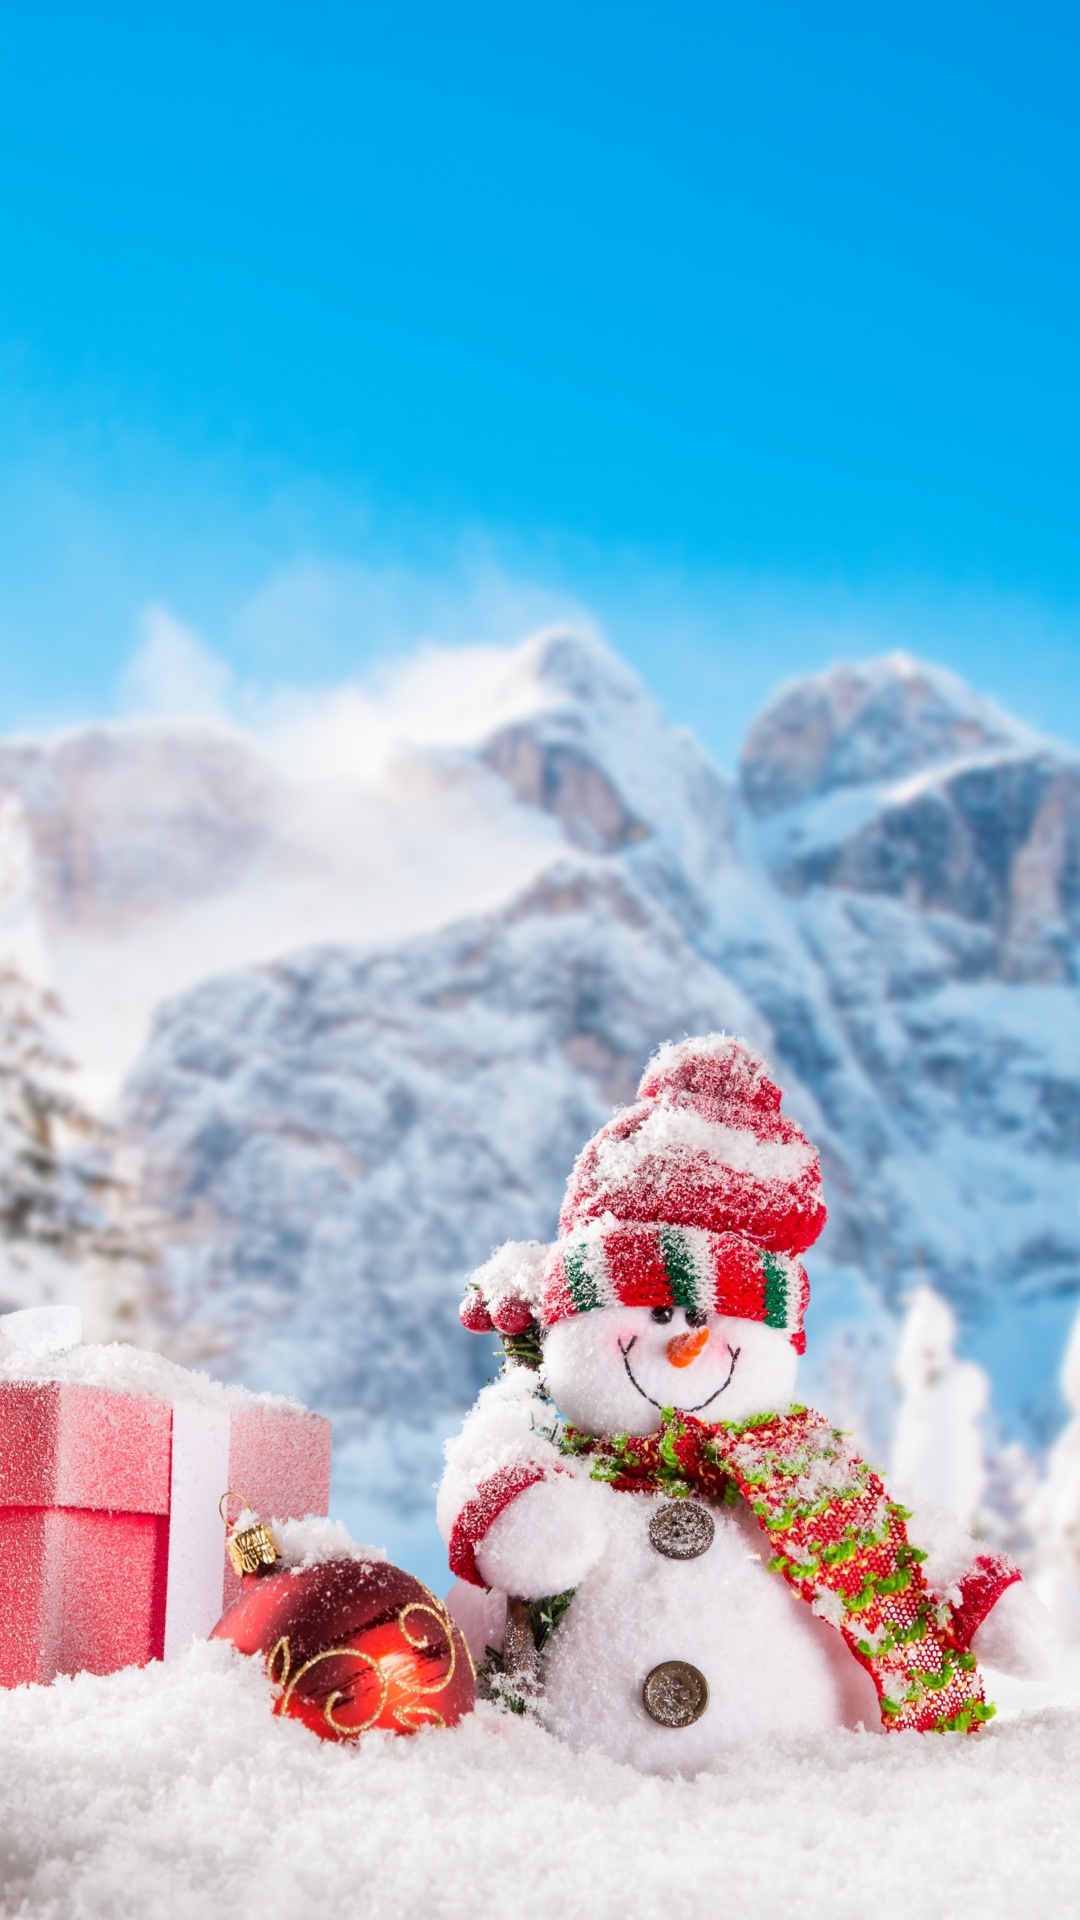 Red and White Santa Claus on Snow Covered Ground During Daytime. Wallpaper in 1080x1920 Resolution